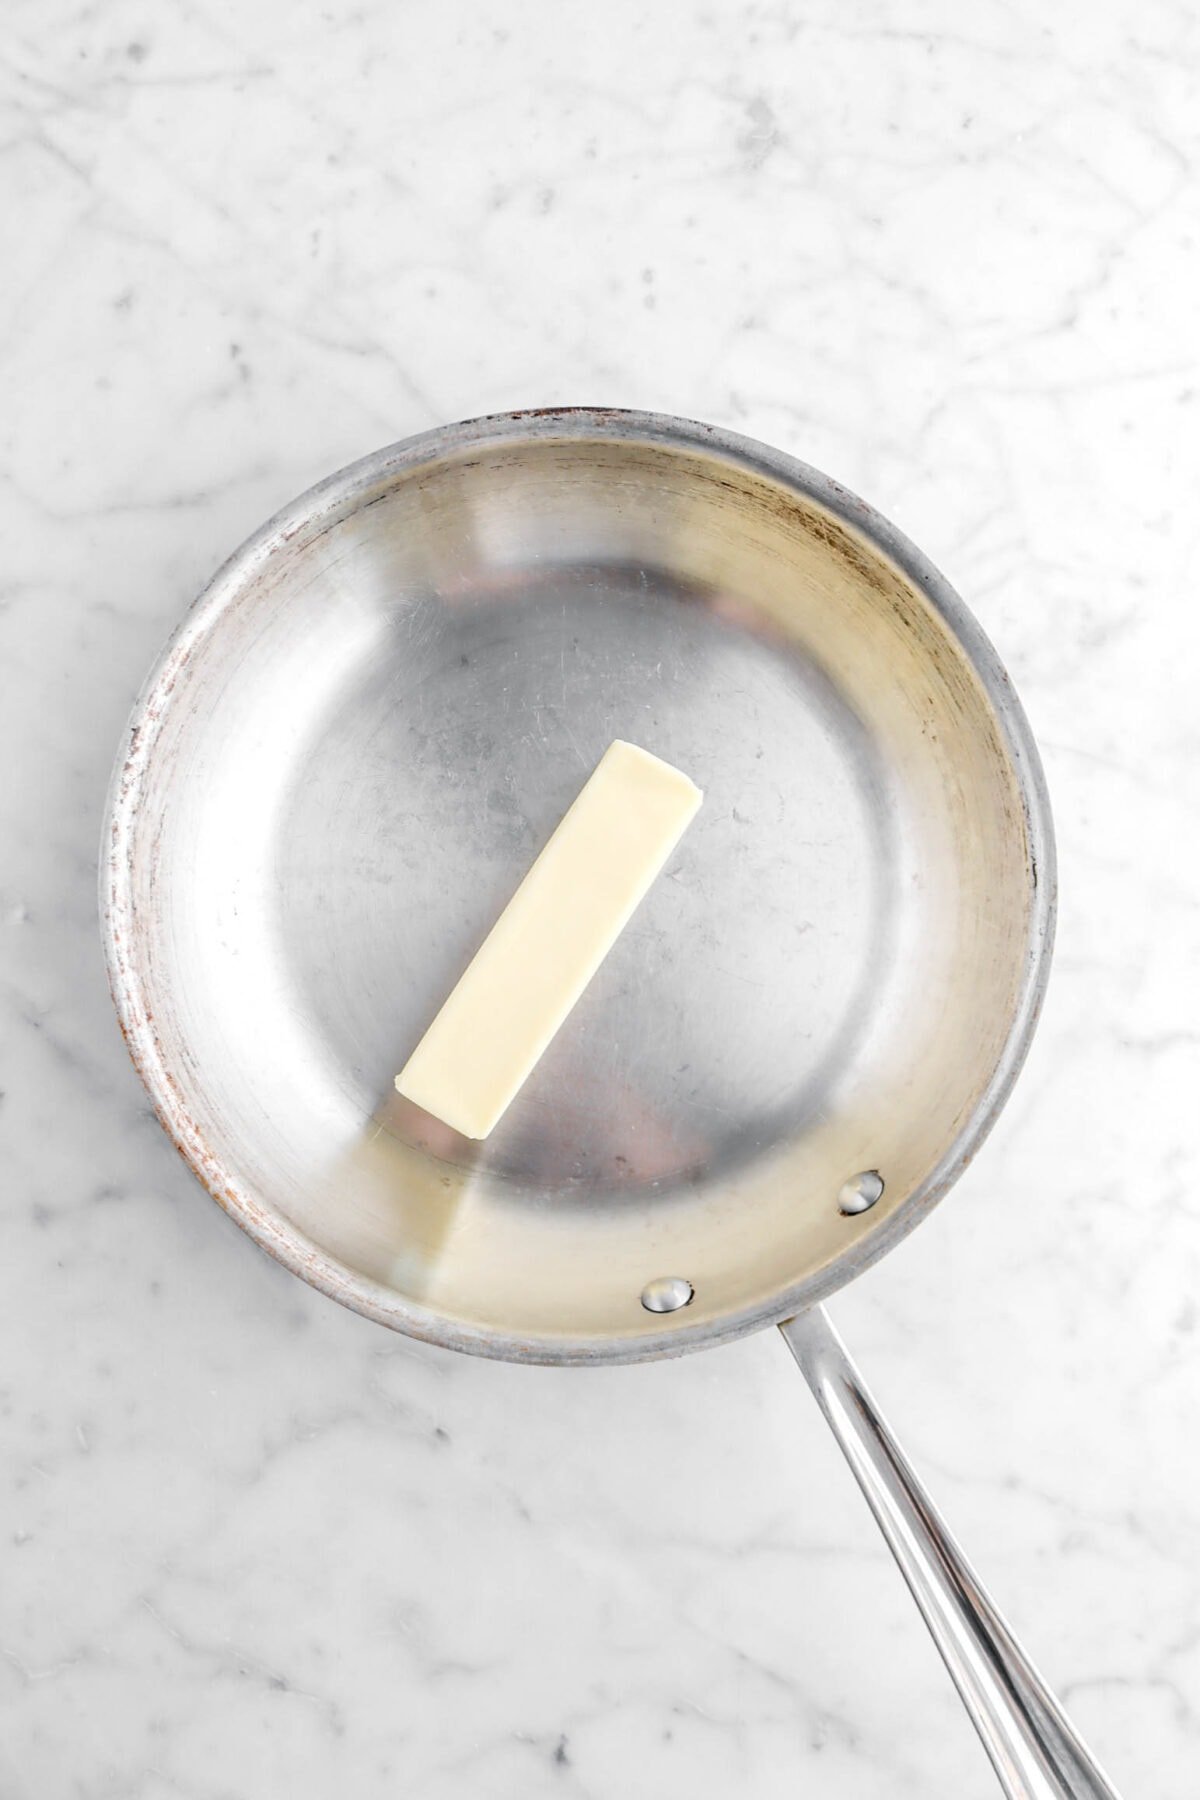 stick of butter in skillet.